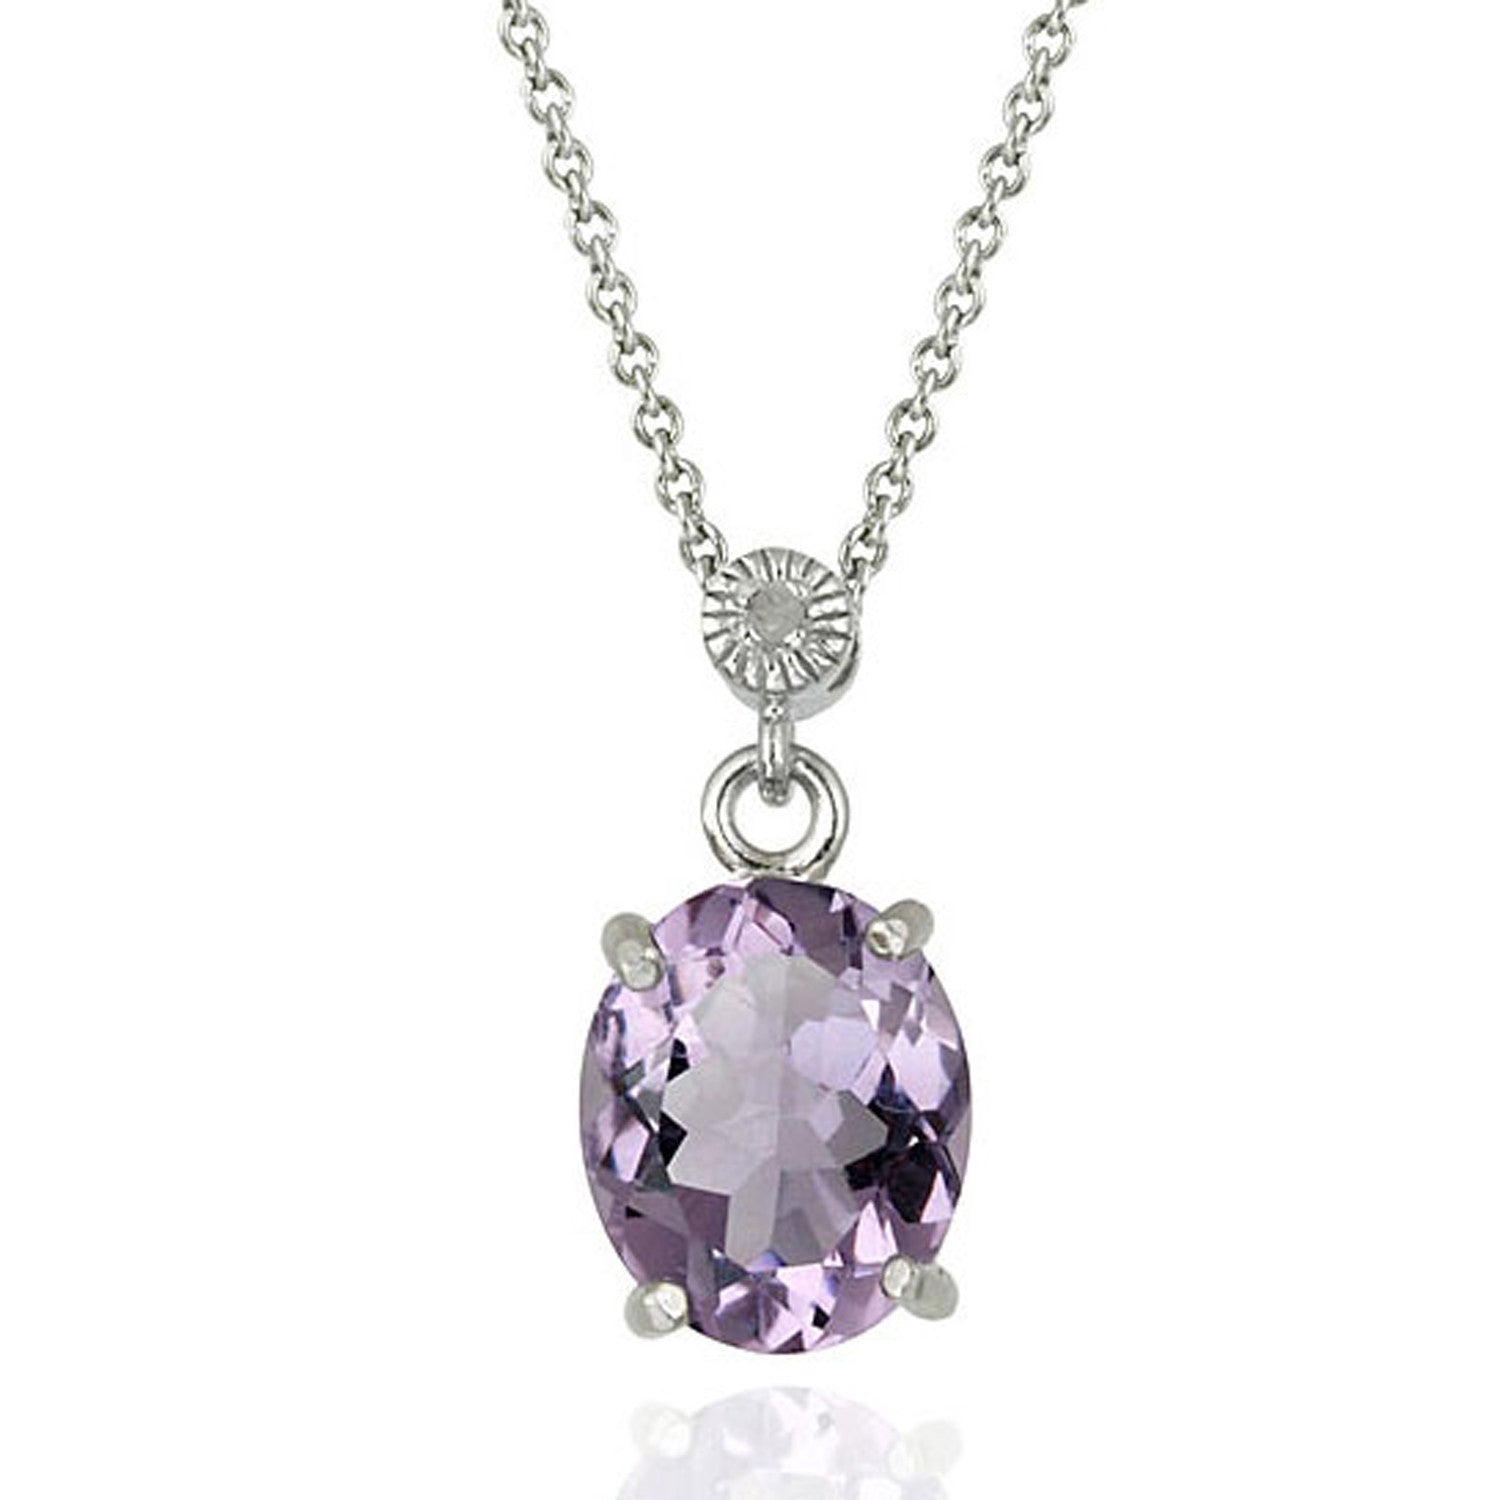 Gemstone & Diamond Accent Necklace in Sterling Silver - Amethyst